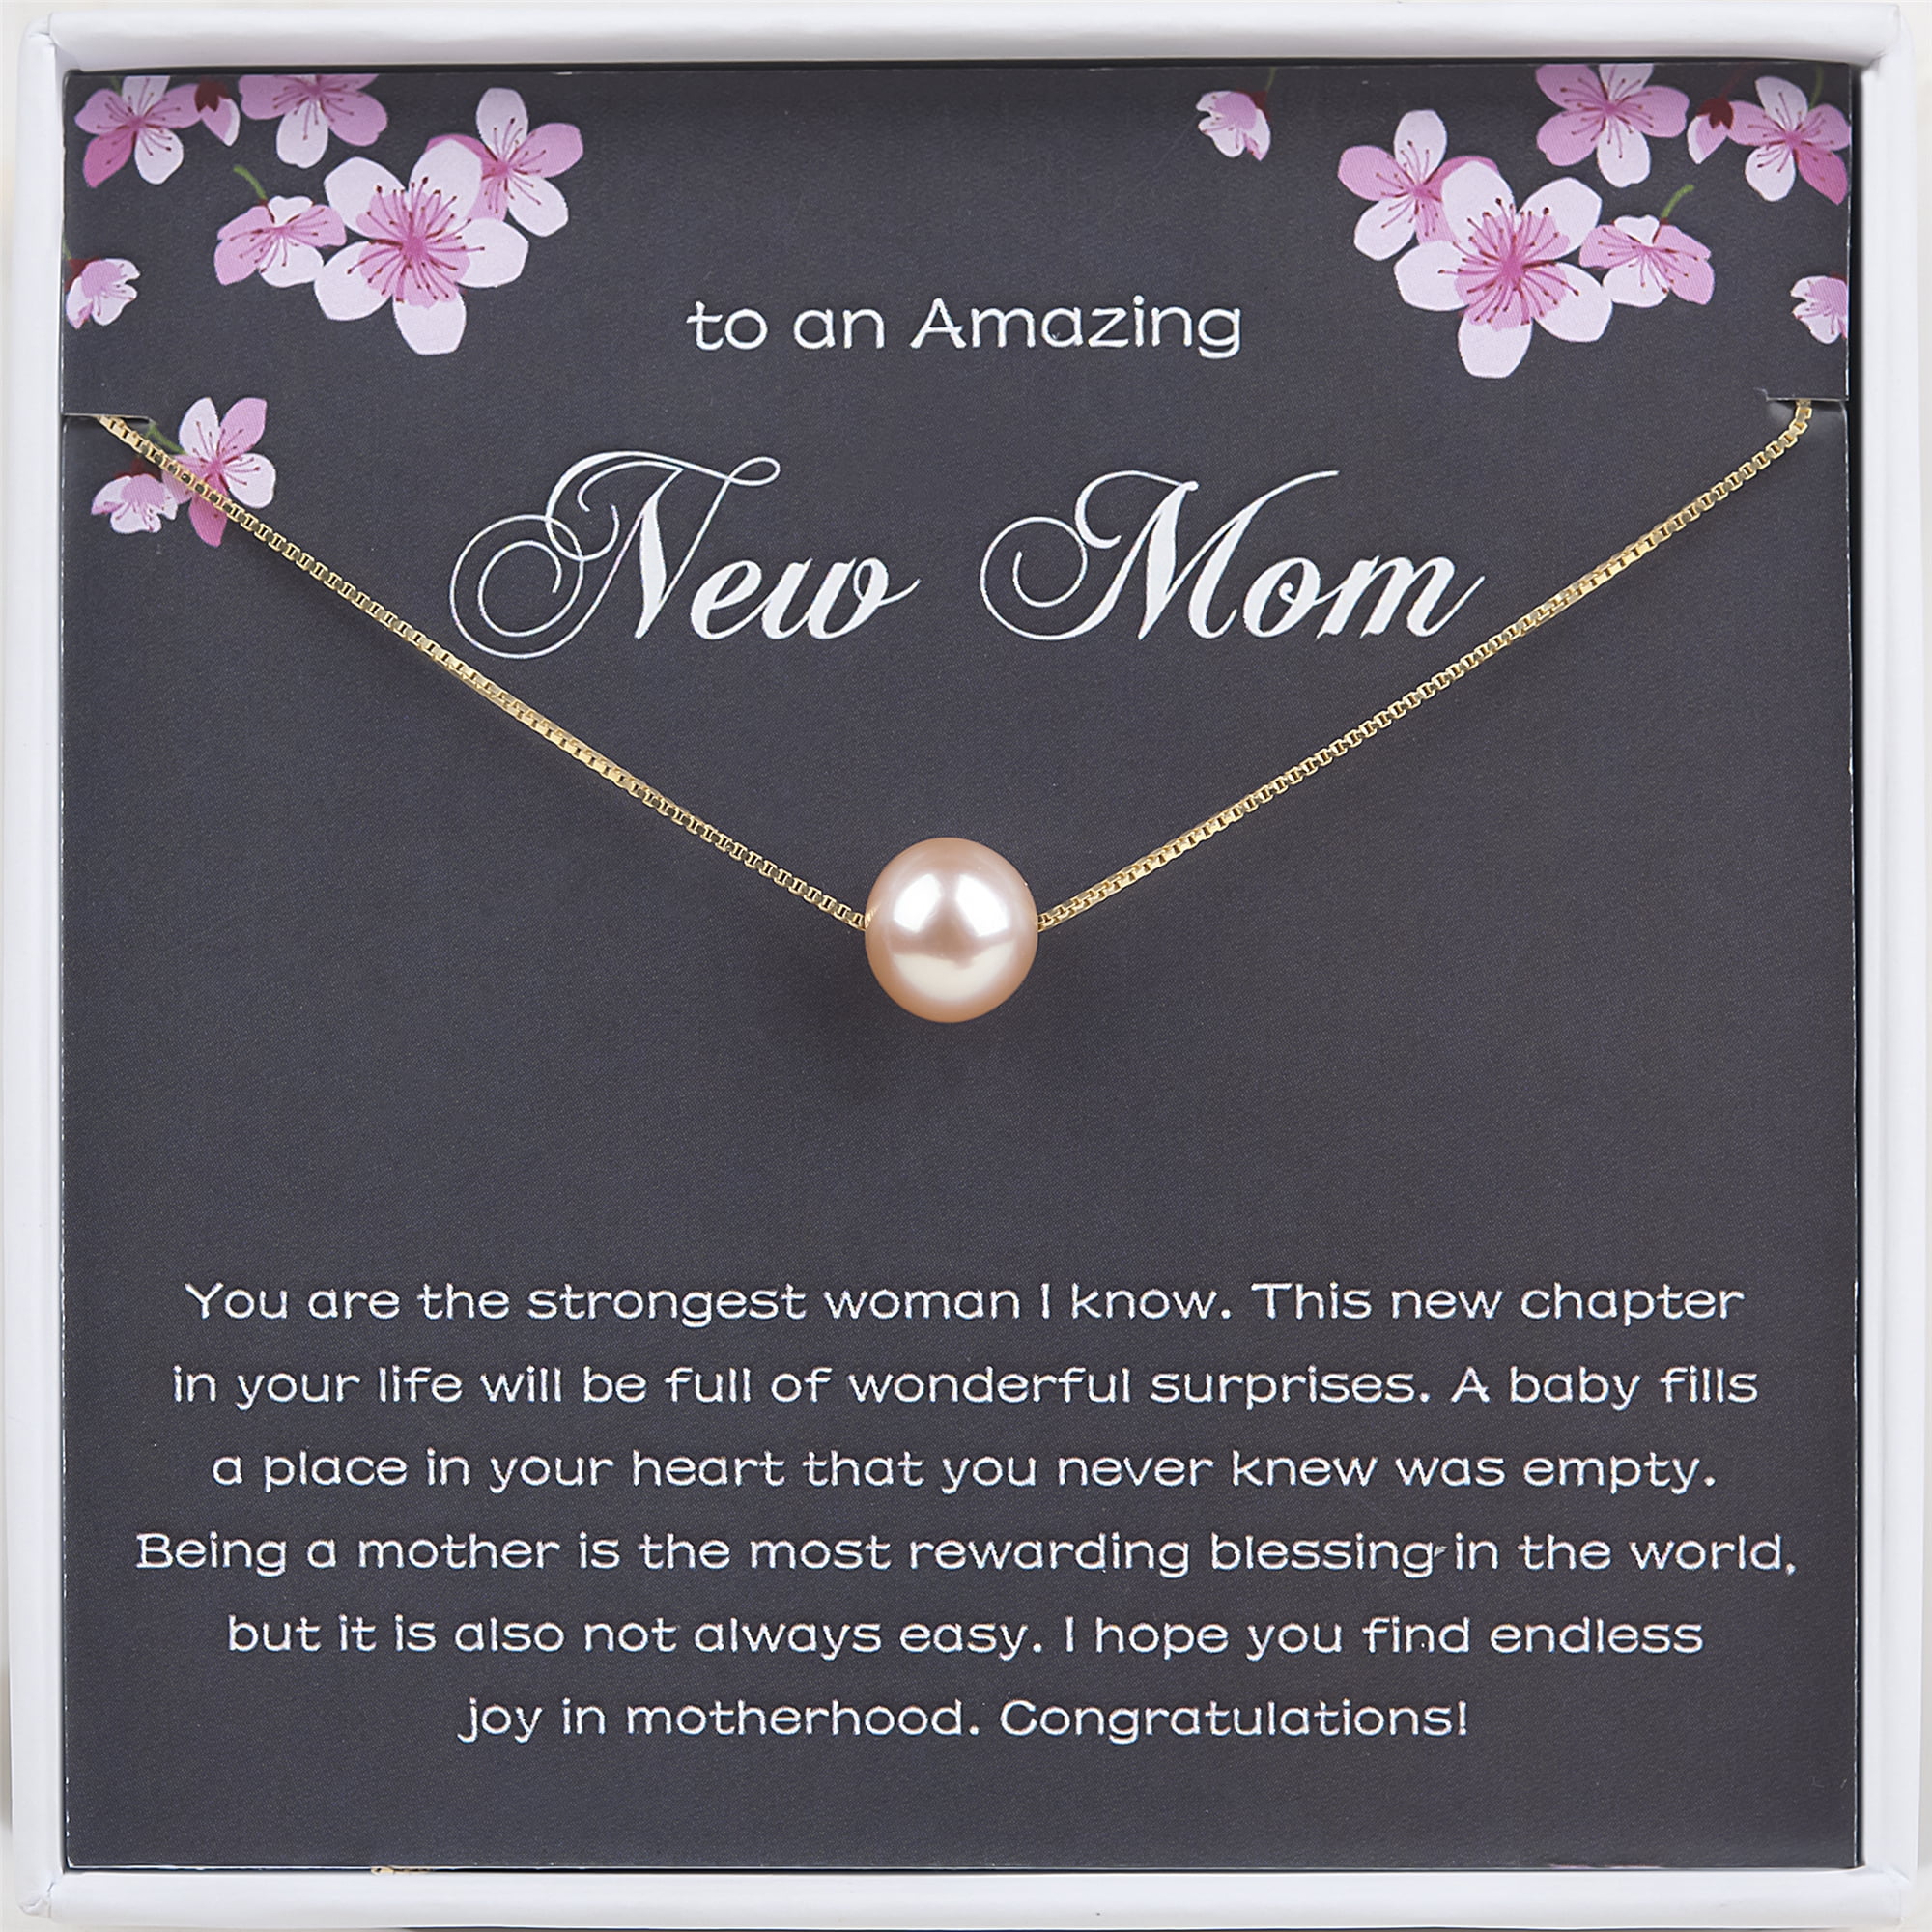 Anavia To An Amazing New Mom Gift Card, New Mom 925 Sterling Silver Pearl  Necklace, Congratulations to the New Mom Gift -[Pink Pearl + Silver Chain]